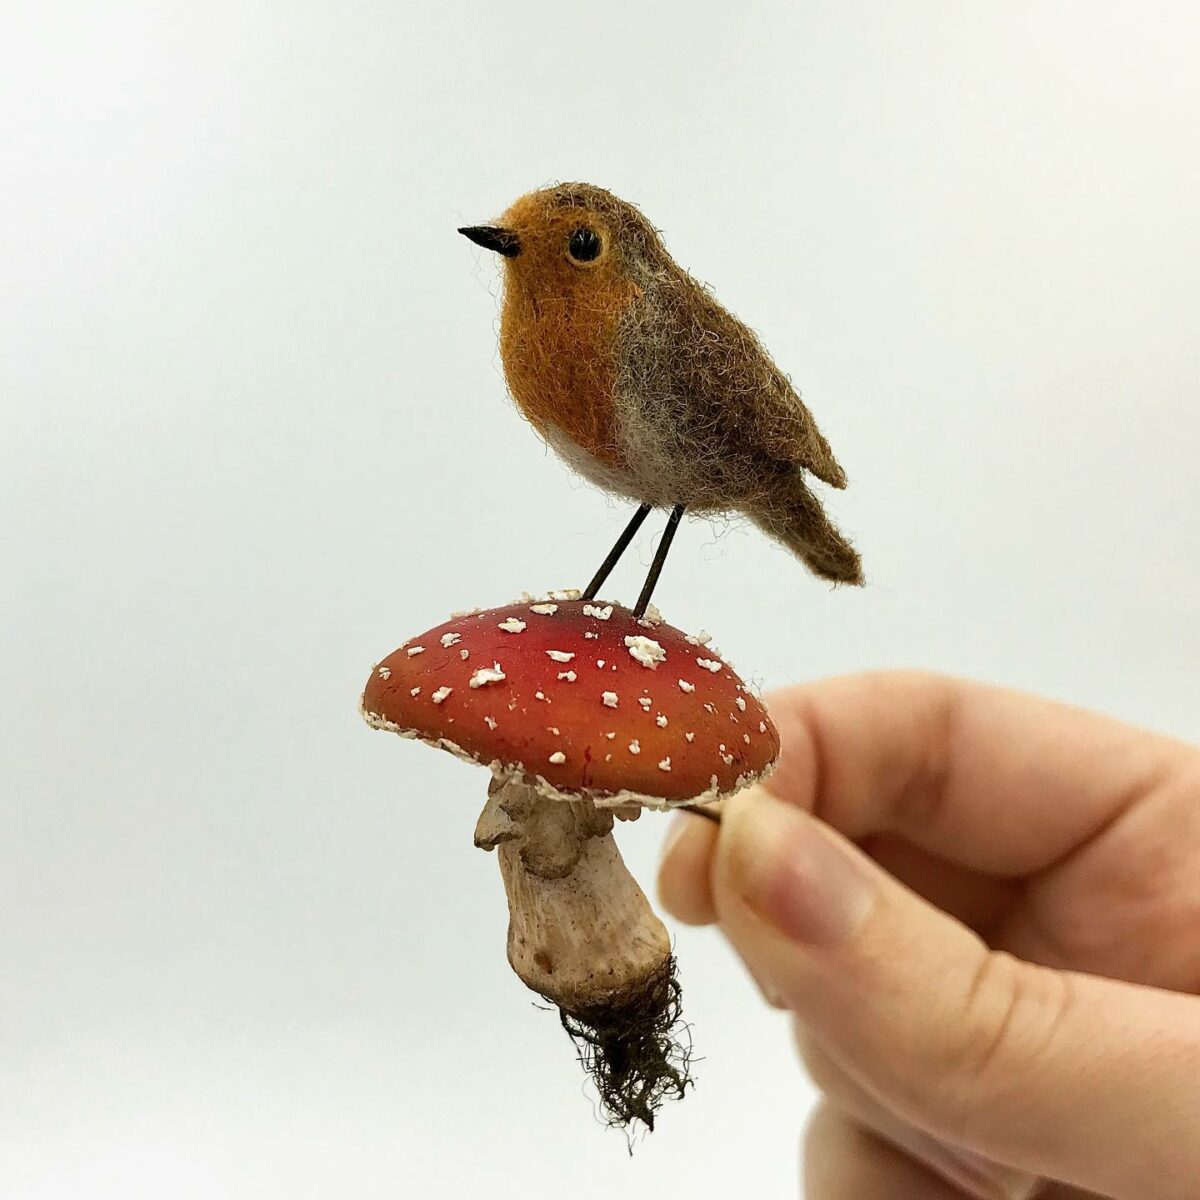 Felted Wildlife Gorgeous Miniature Animal Sculptures By Simon Brown And Katie Corrigan 10